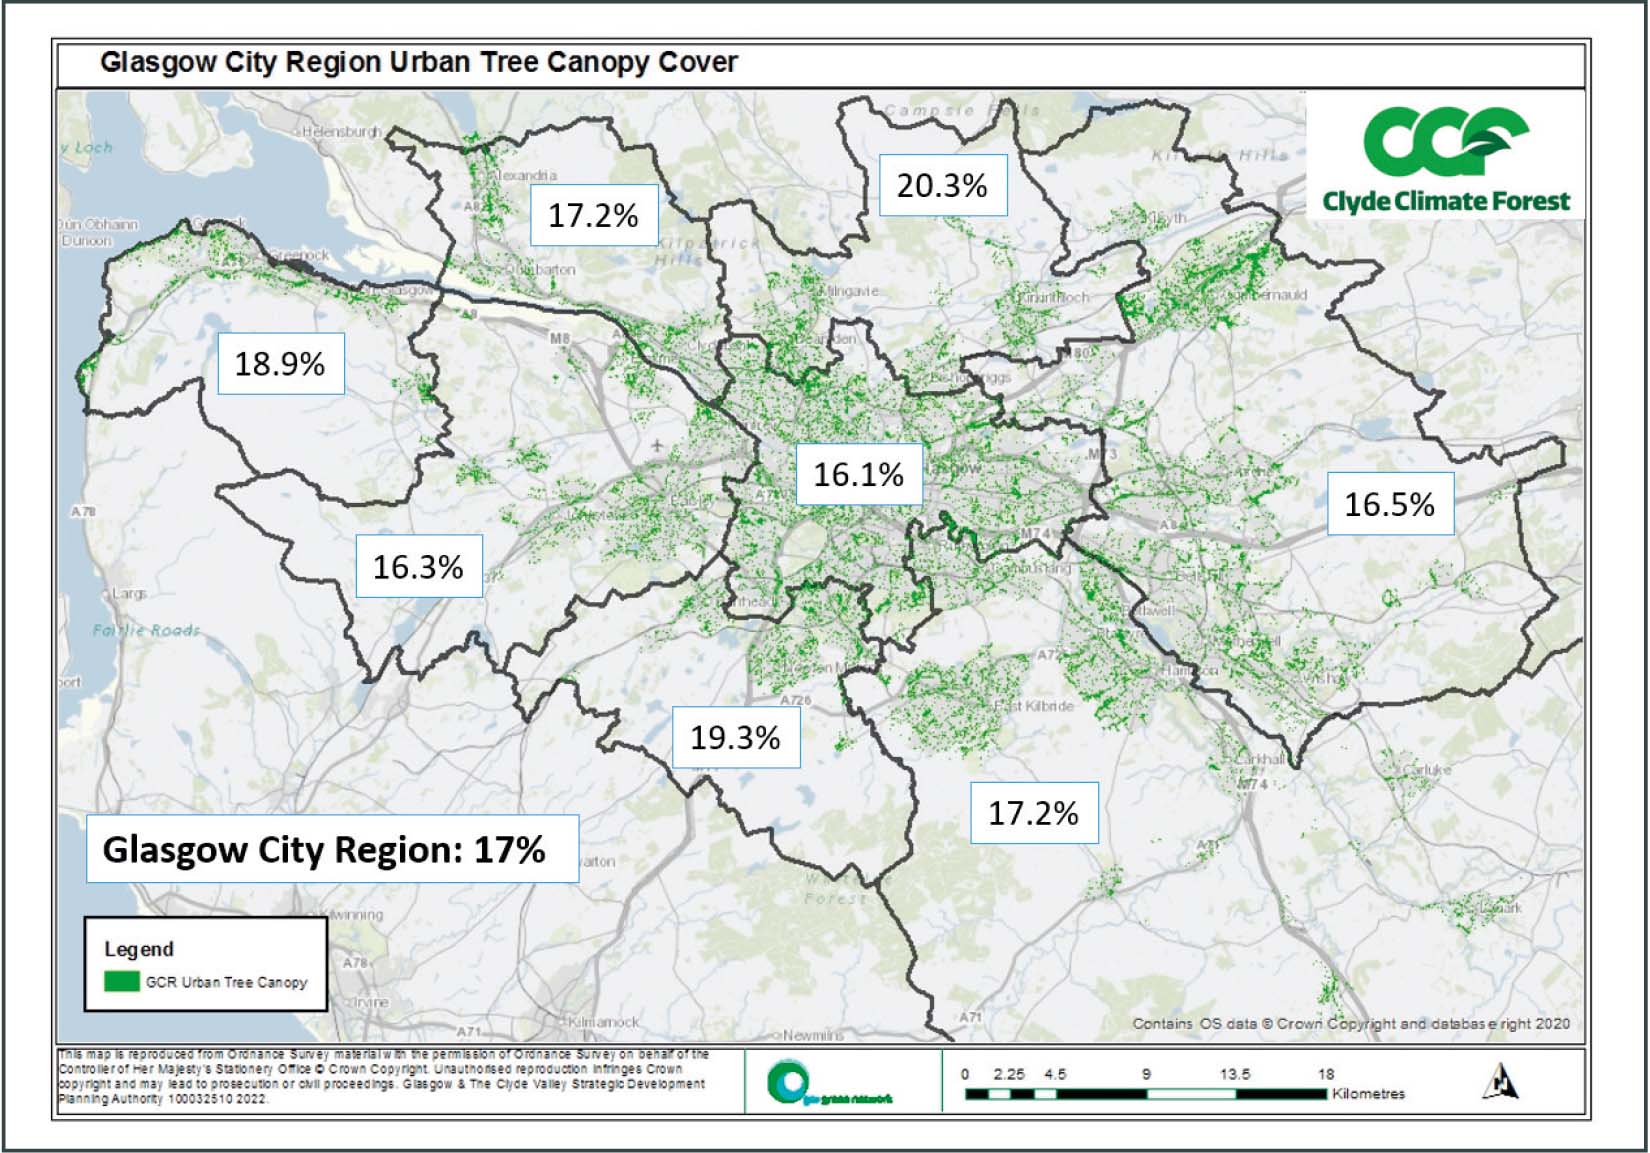 Clyde Climate Forest: Map of Glasgow City Region Urban Tree Canopy Cover